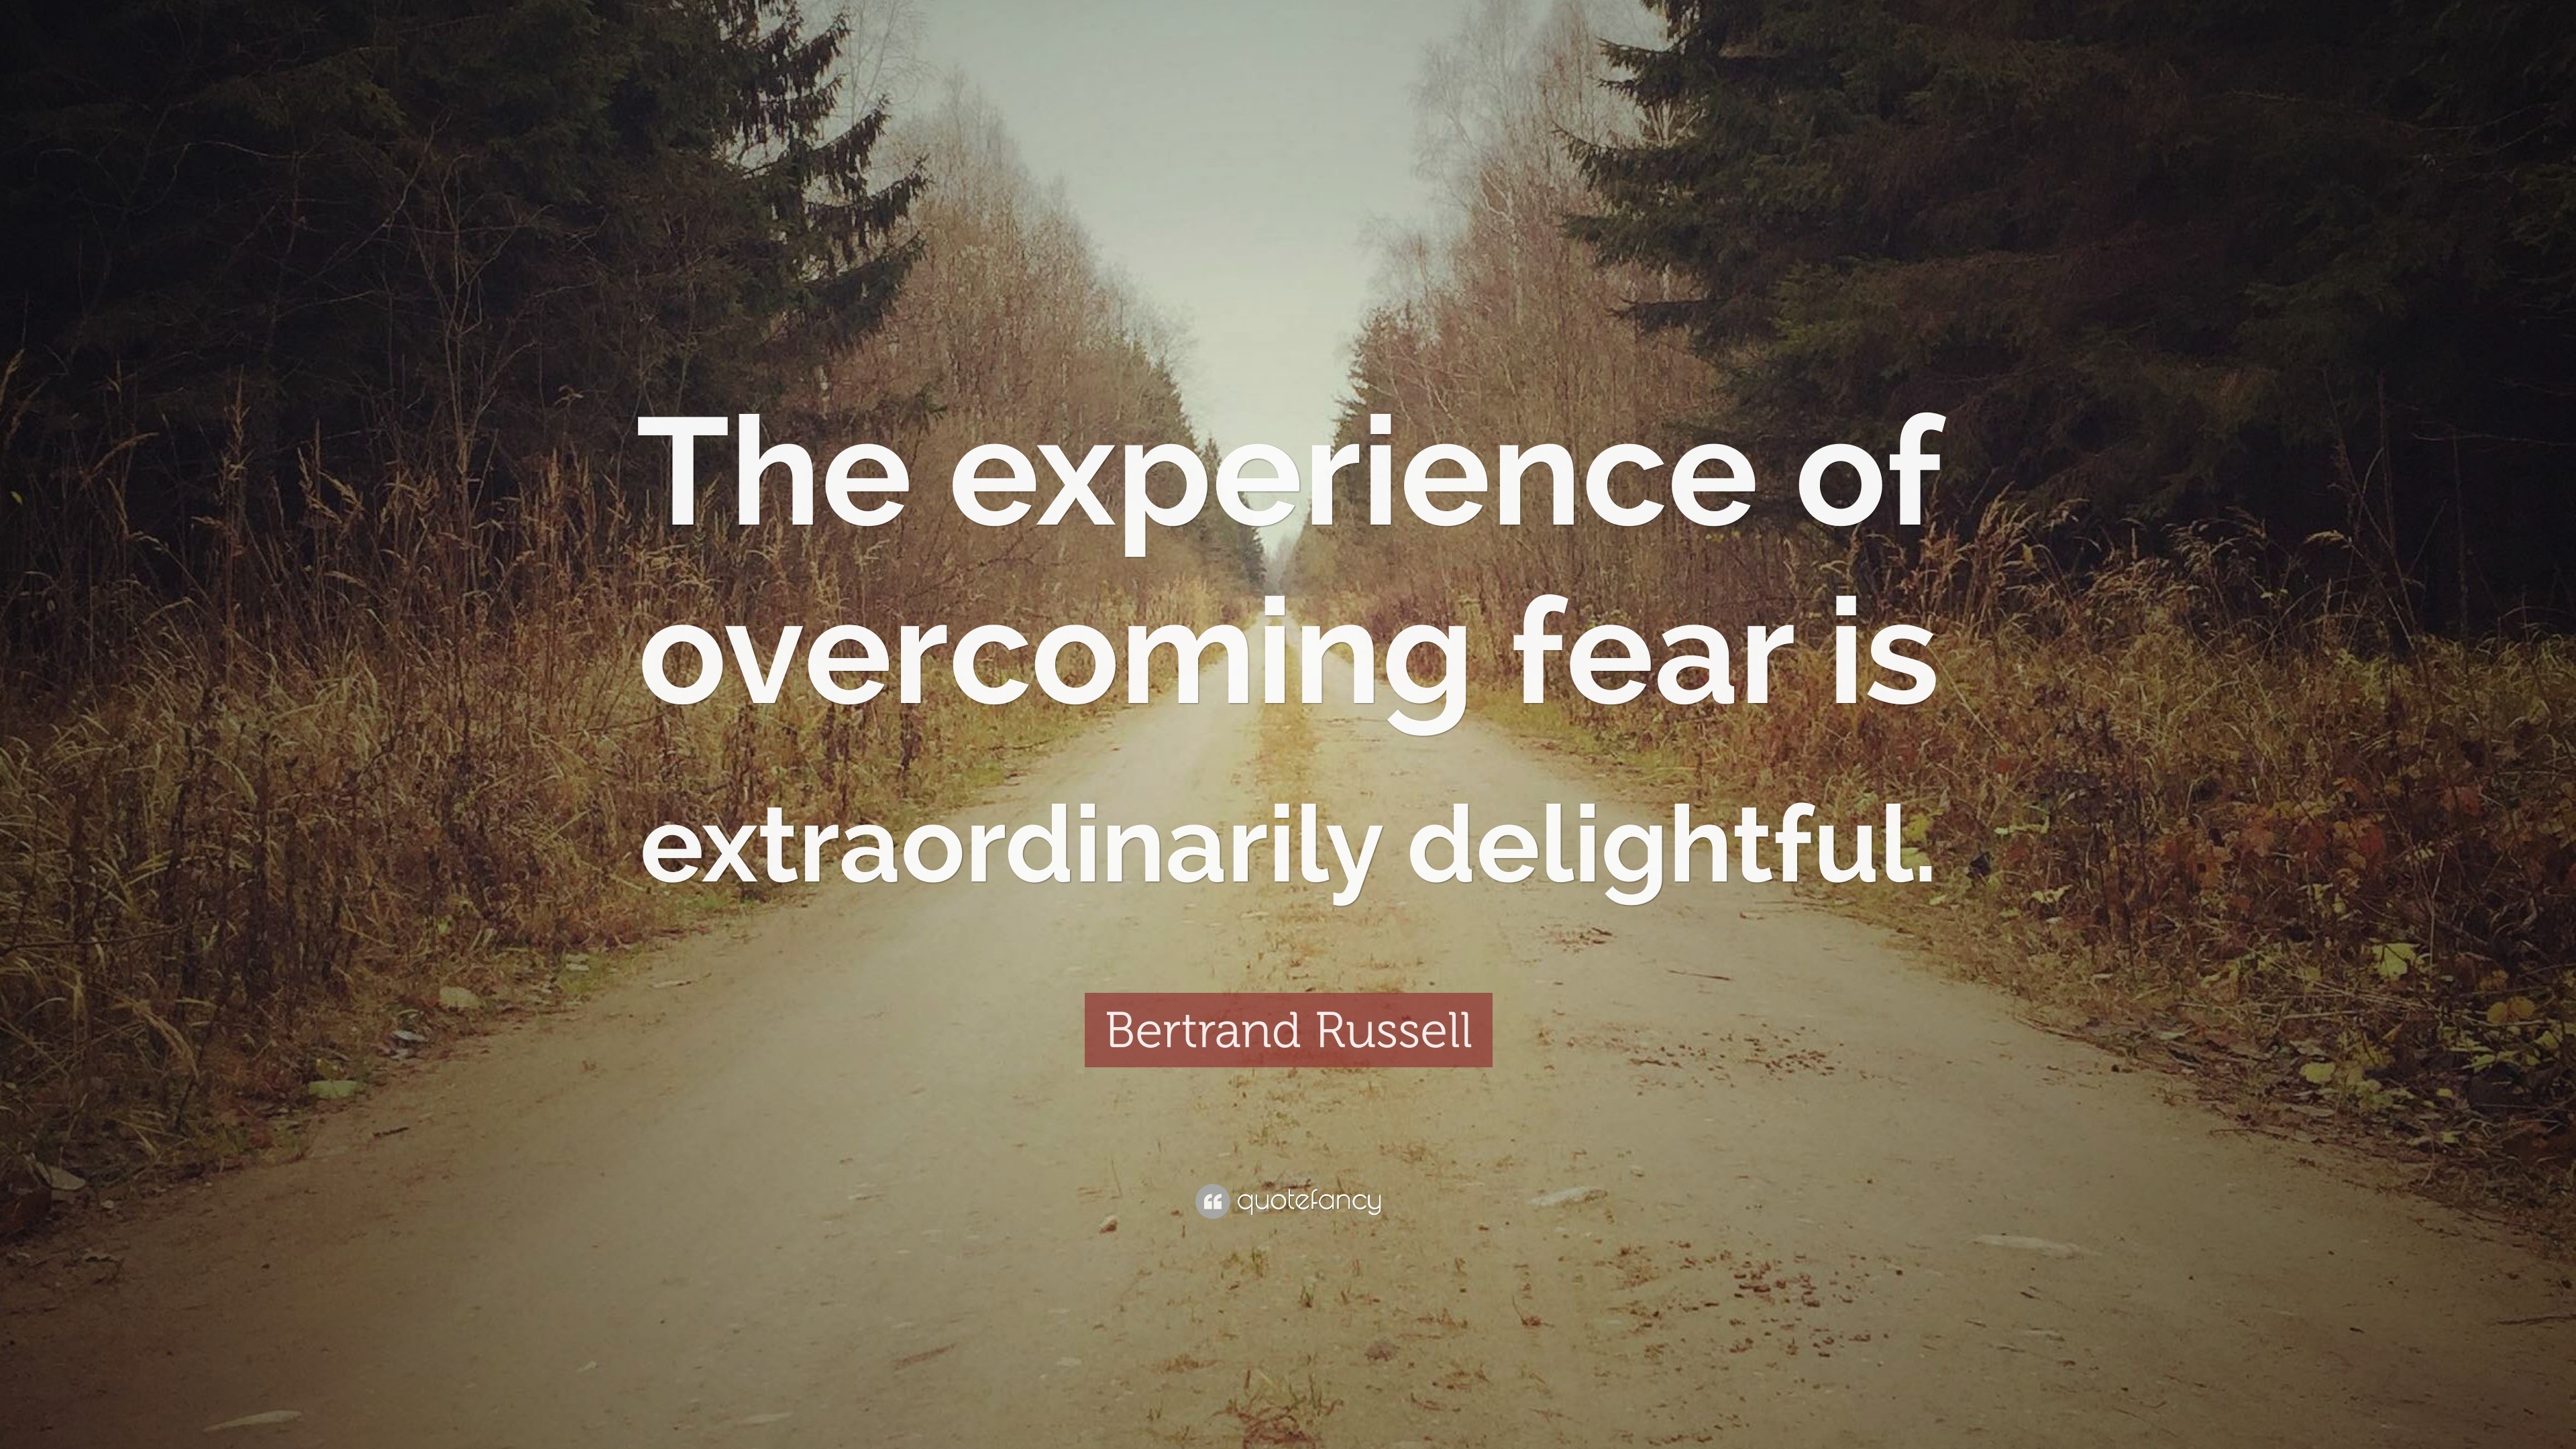 Bertrand Russell Quote “The experience of fear